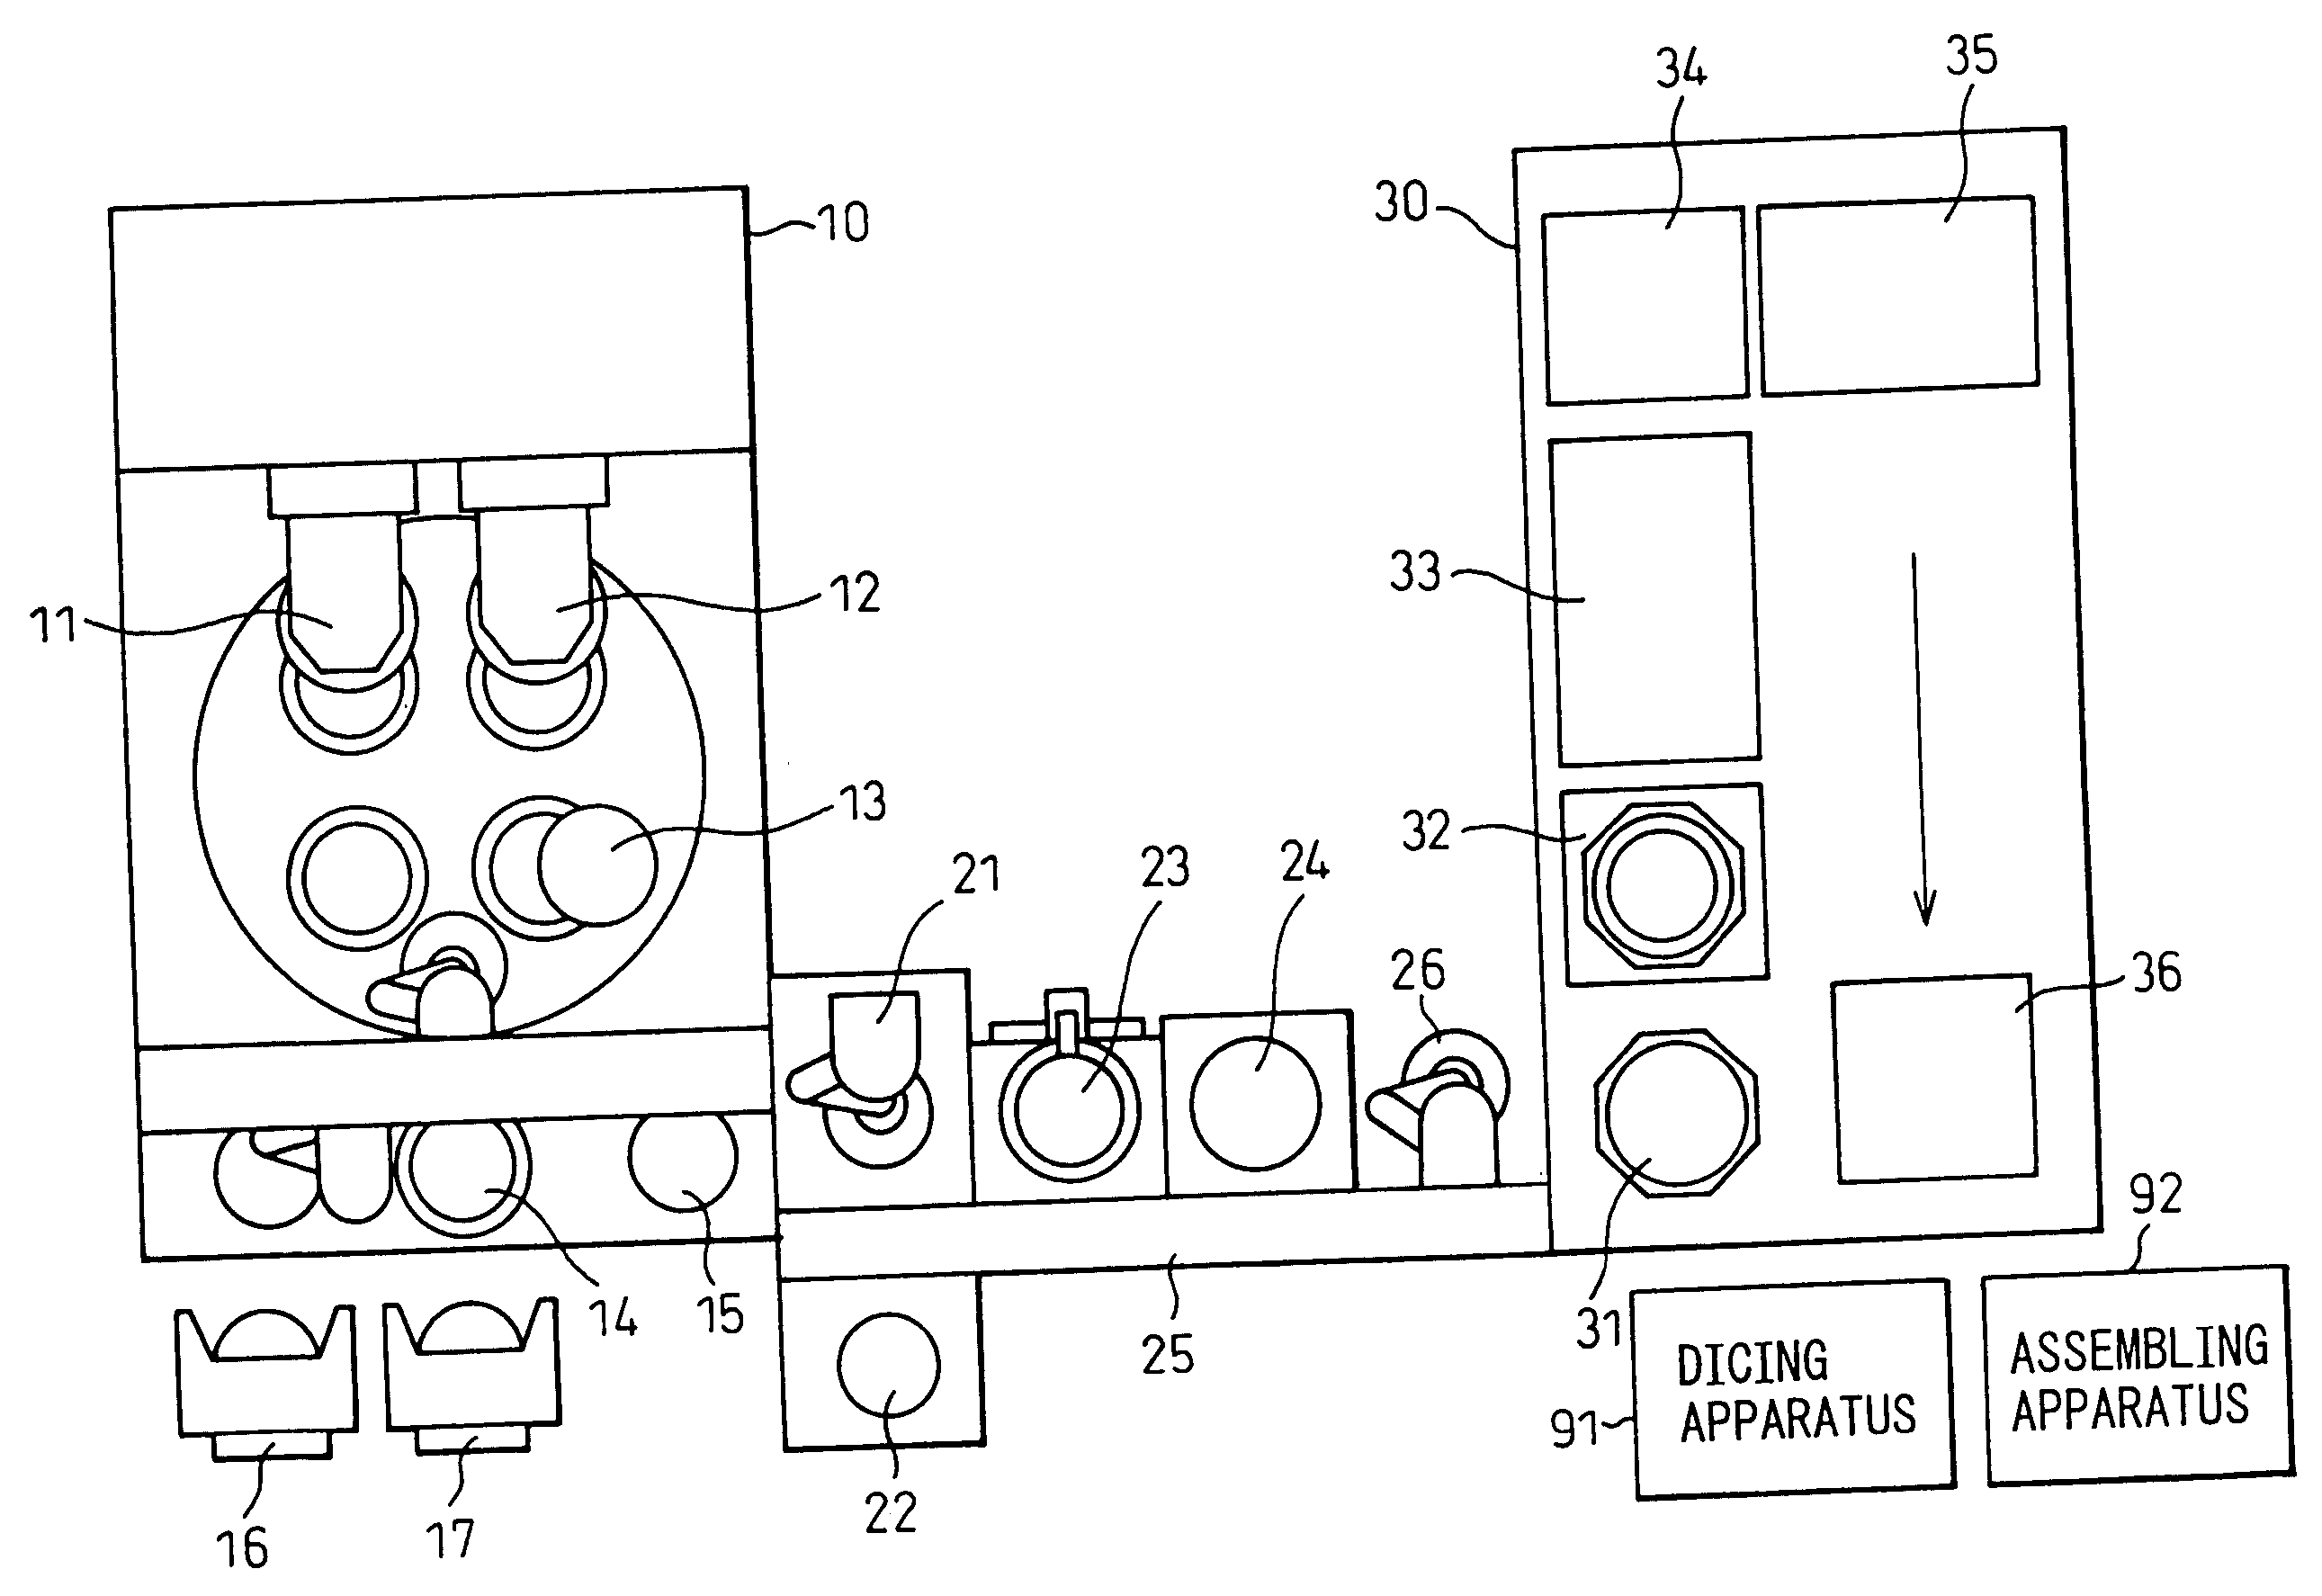 Dicing tape applying apparatus and back-grinding/dicing tape applying system